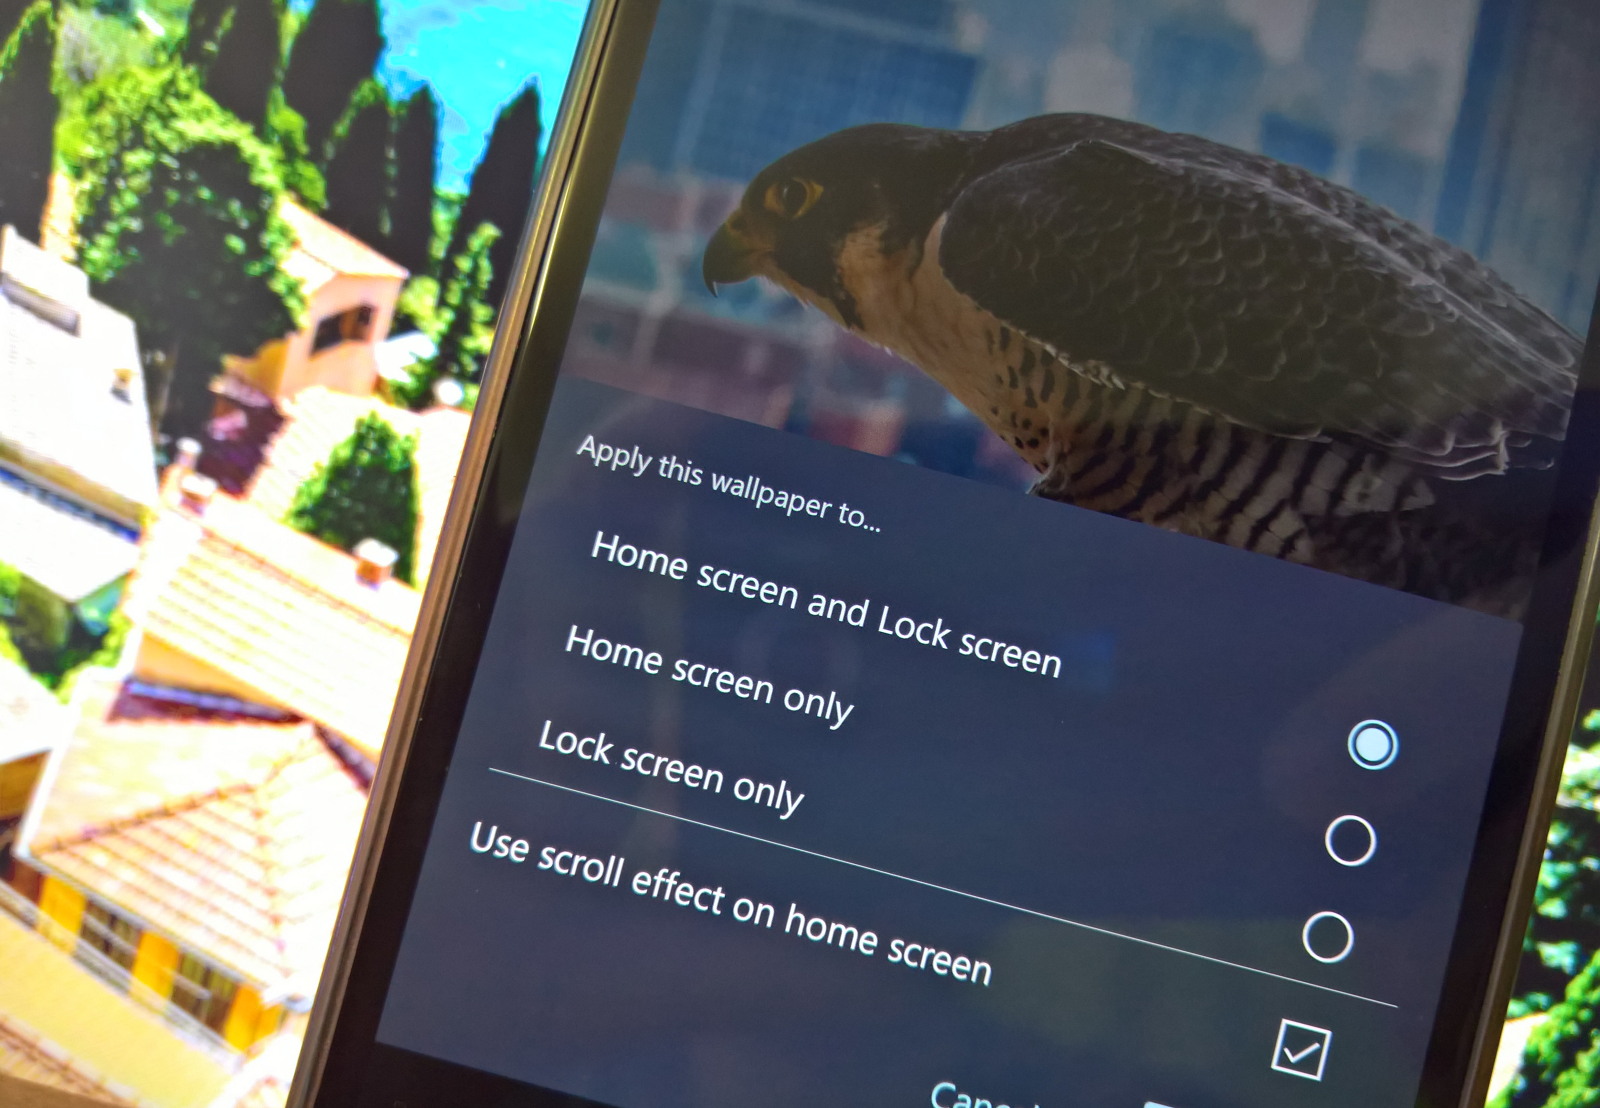 How to set Lock screen wallpaper using Microsoft Launcher on